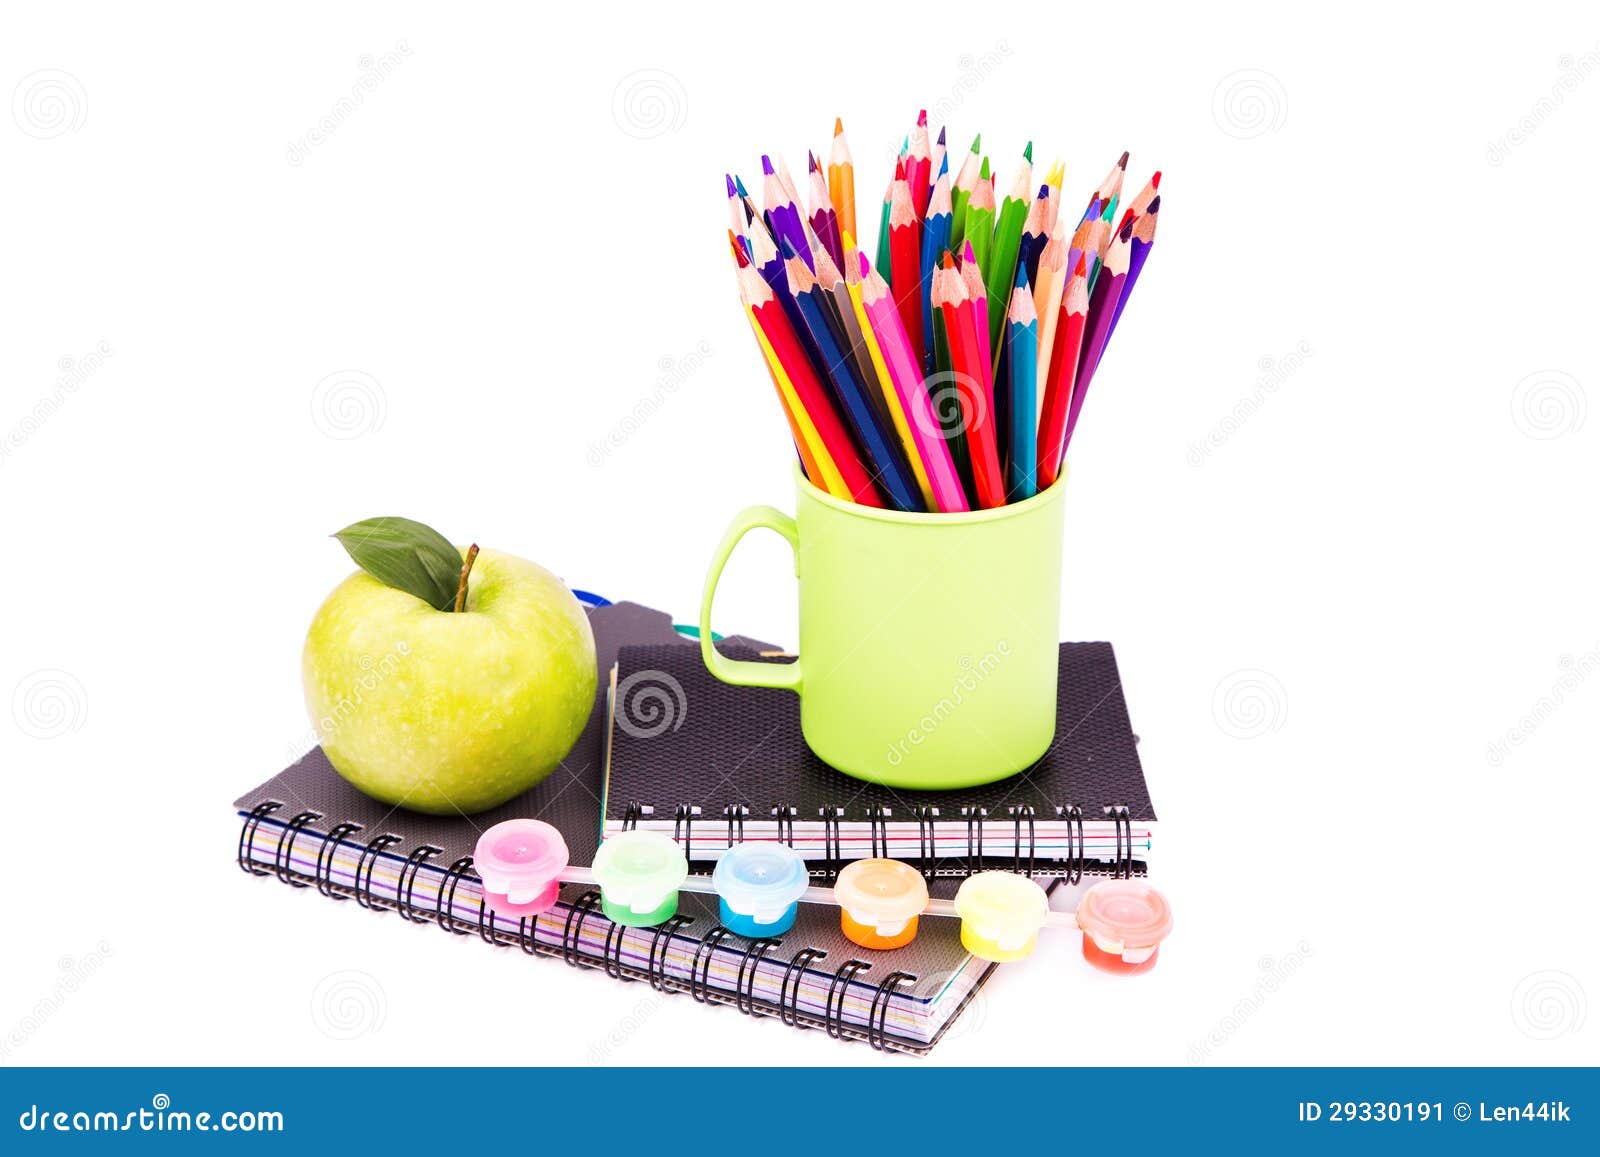 office clipart back to school - photo #30